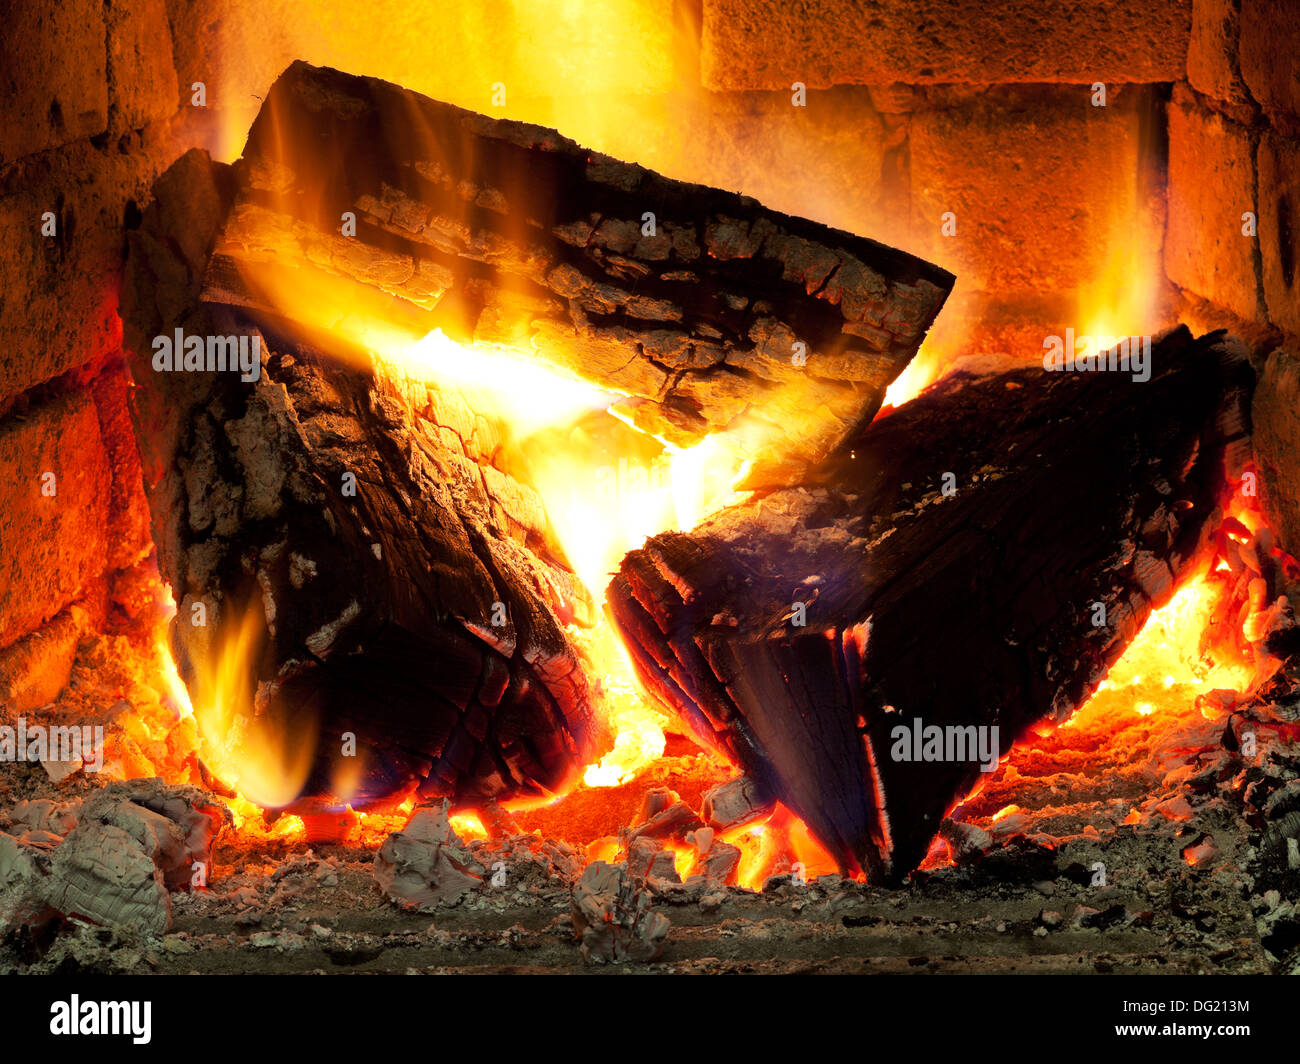 burning fuelwood in fireplace in evening time Stock Photo